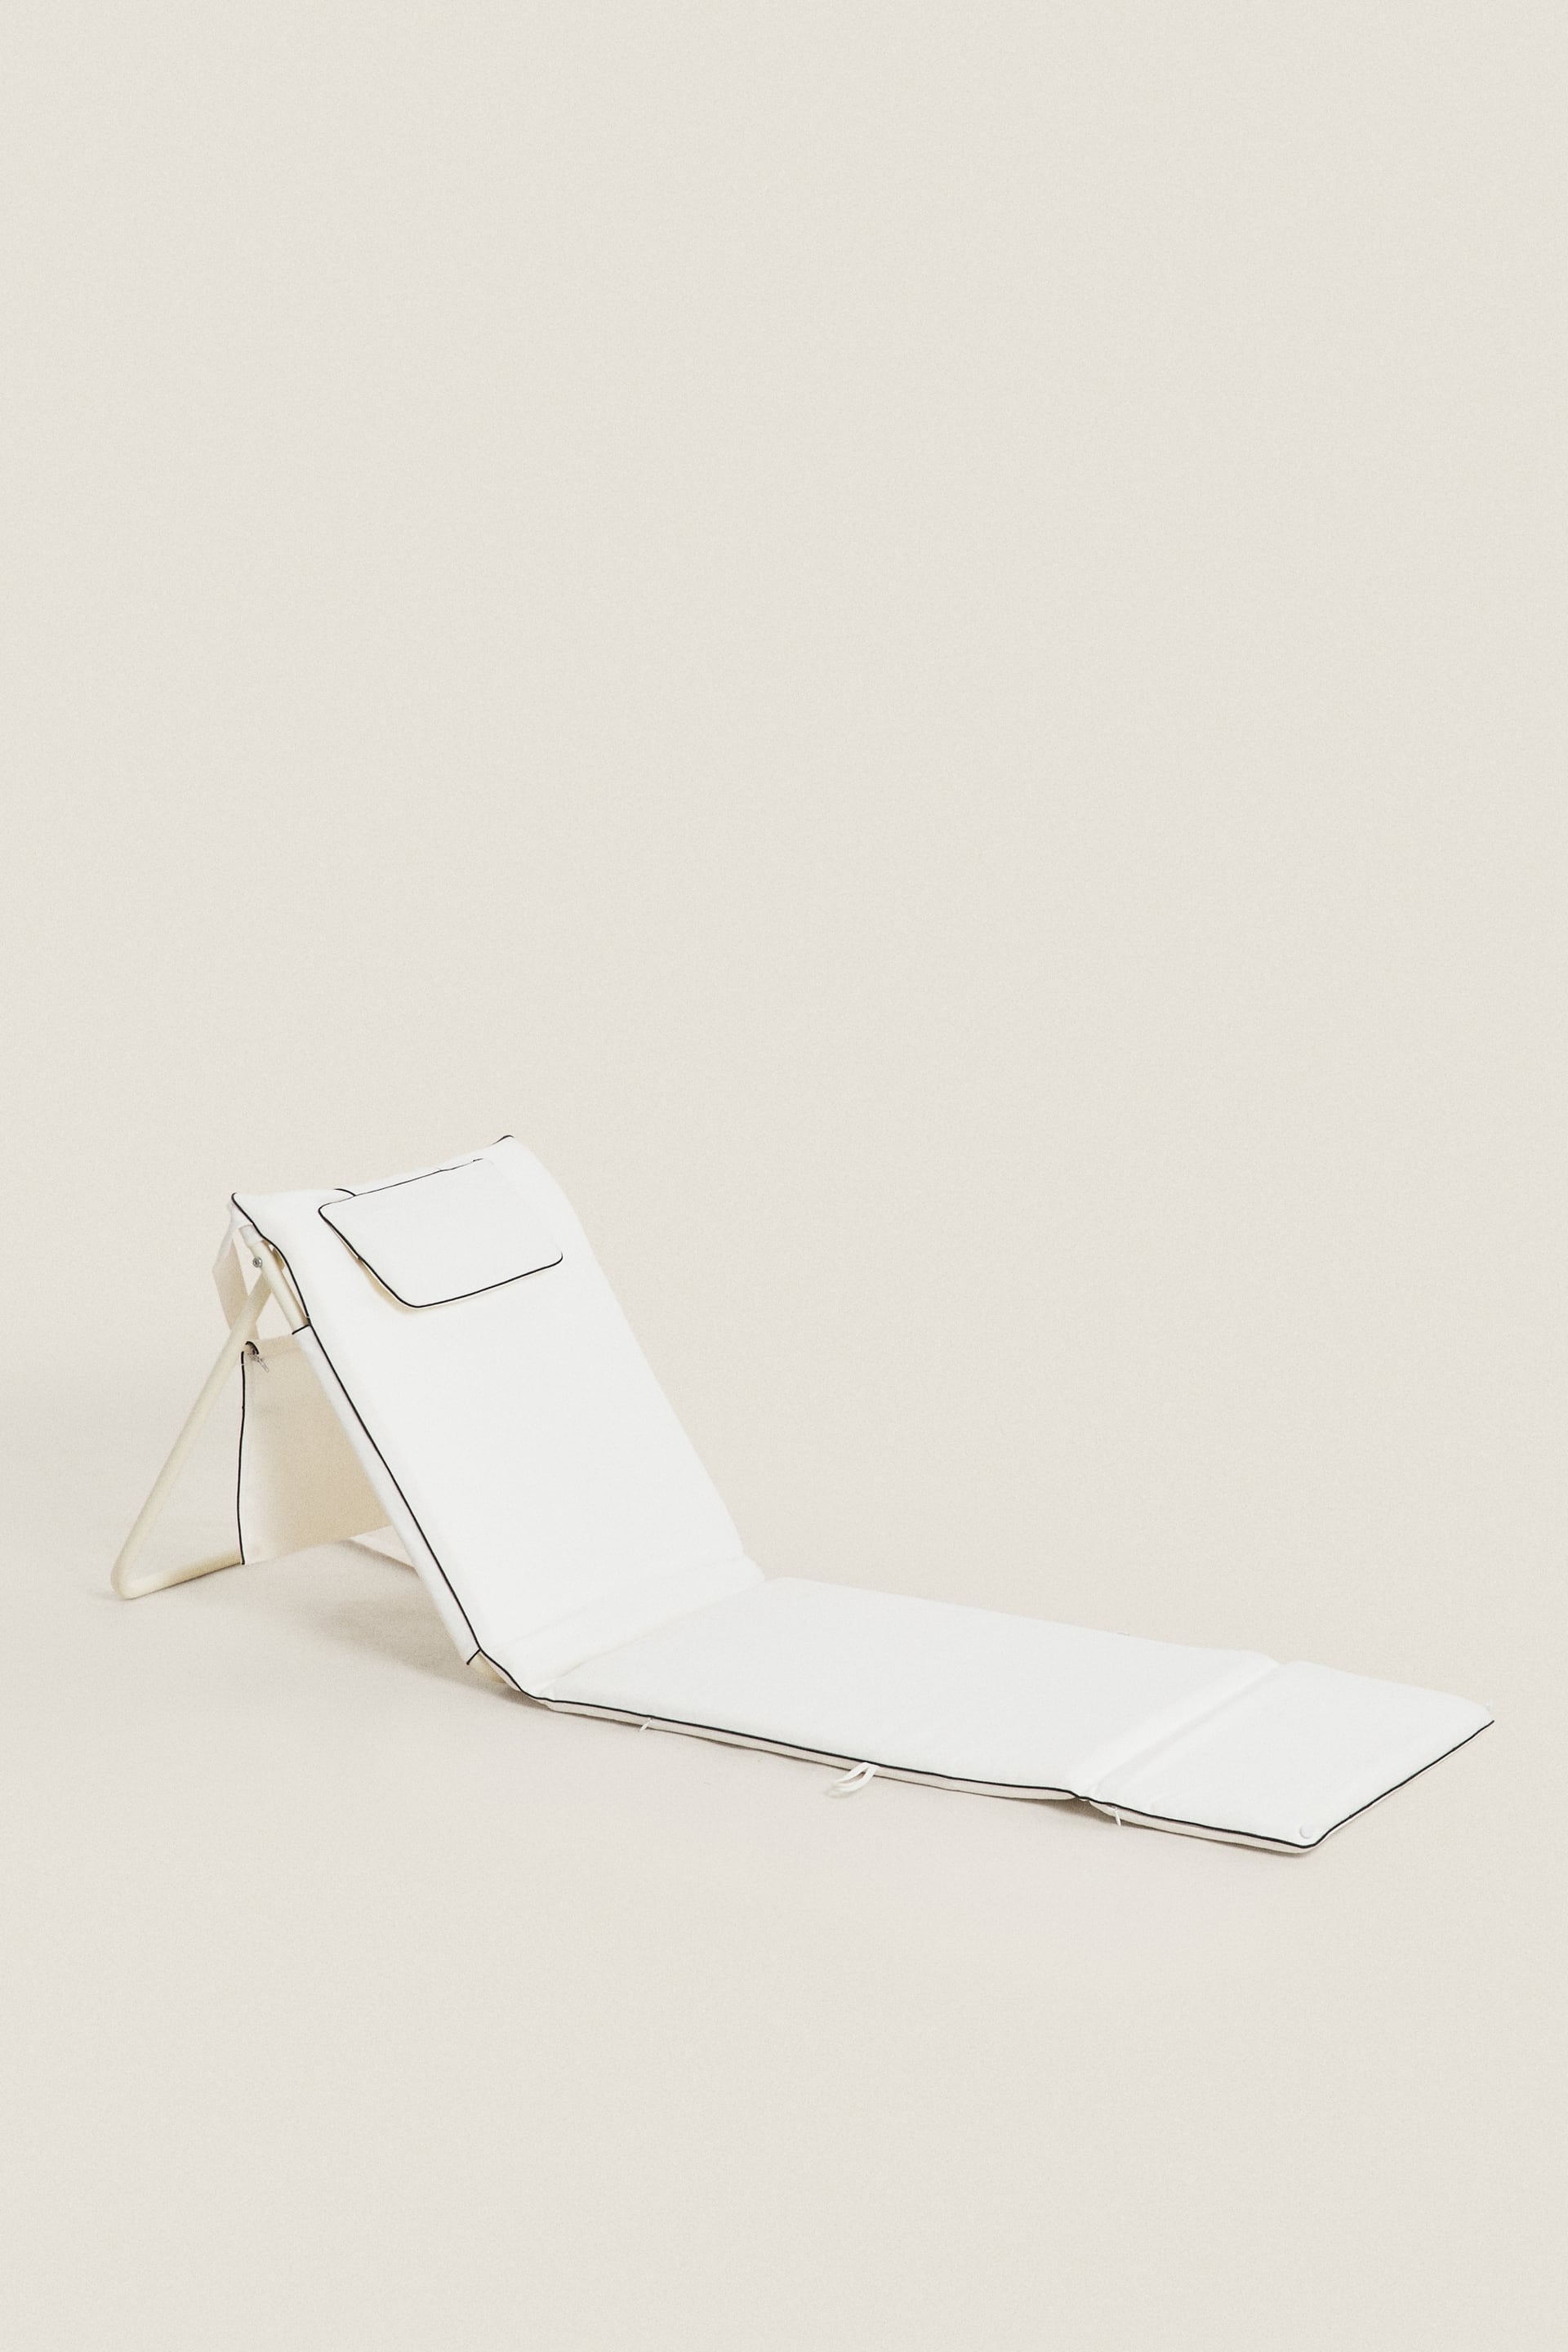 CHAISE INCLINABLE PLAGE